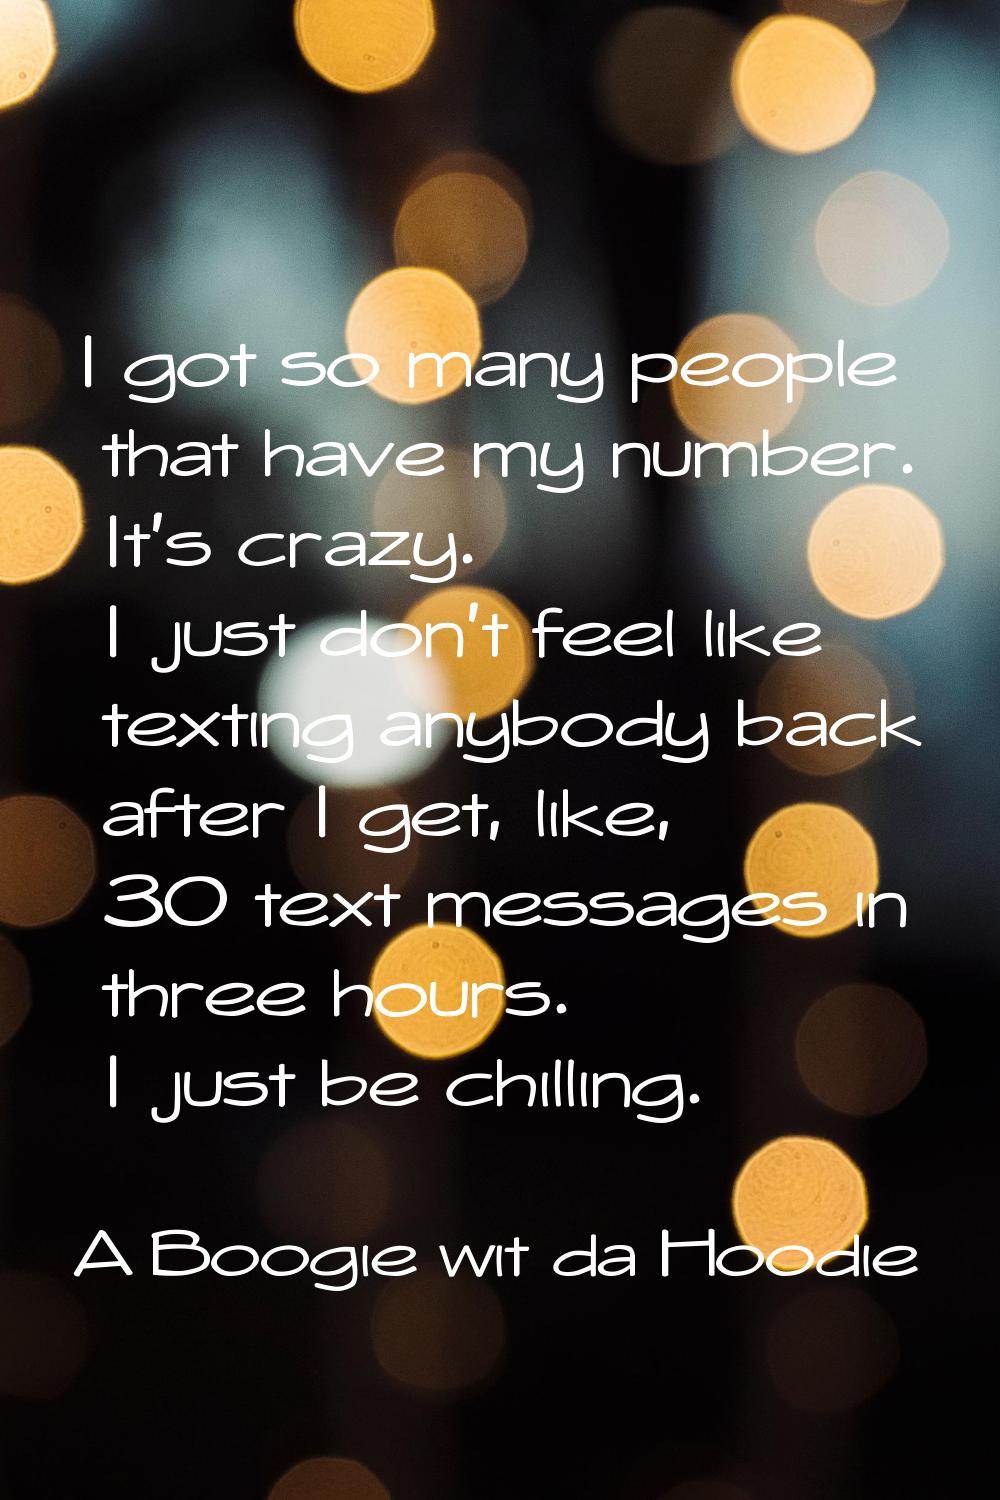 I got so many people that have my number. It's crazy. I just don't feel like texting anybody back a